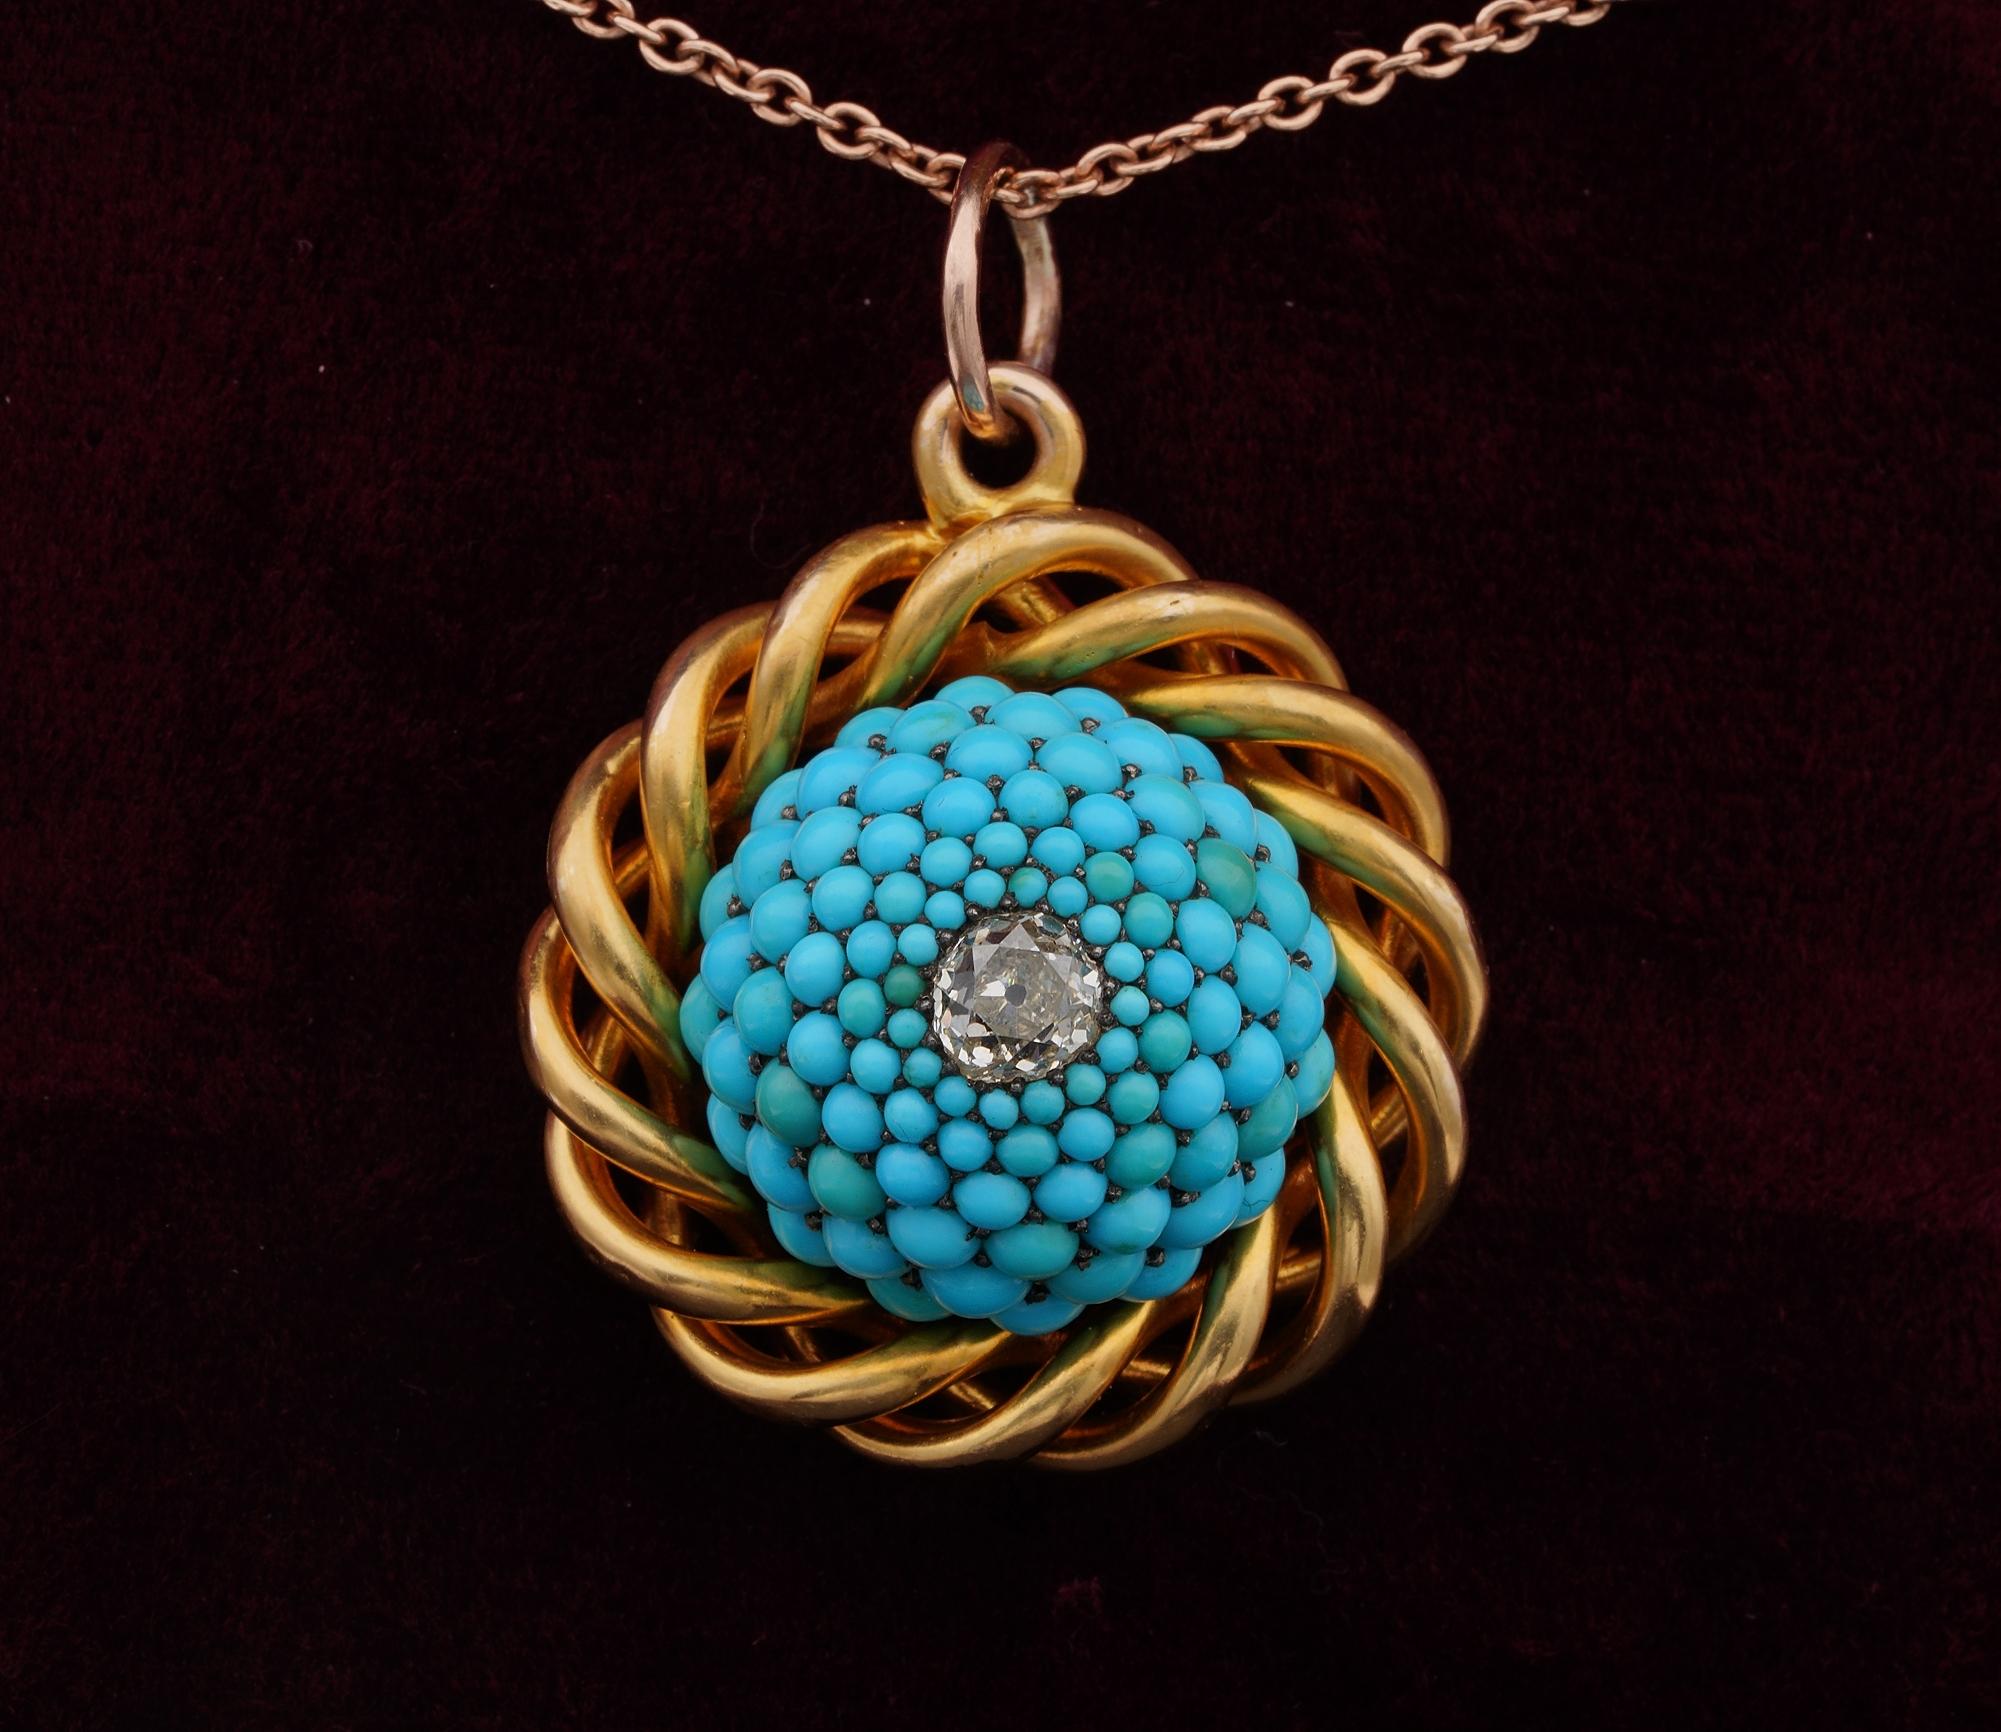 Love Keeper
This beautiful Victorian locket pendant has been hand crafted of solid 18 KT solid gold during 1880 ca
Beautiful designed, boasts a thick gold twisted frame surrounding the main domed part made of wonderful pave’ set natural turquoise